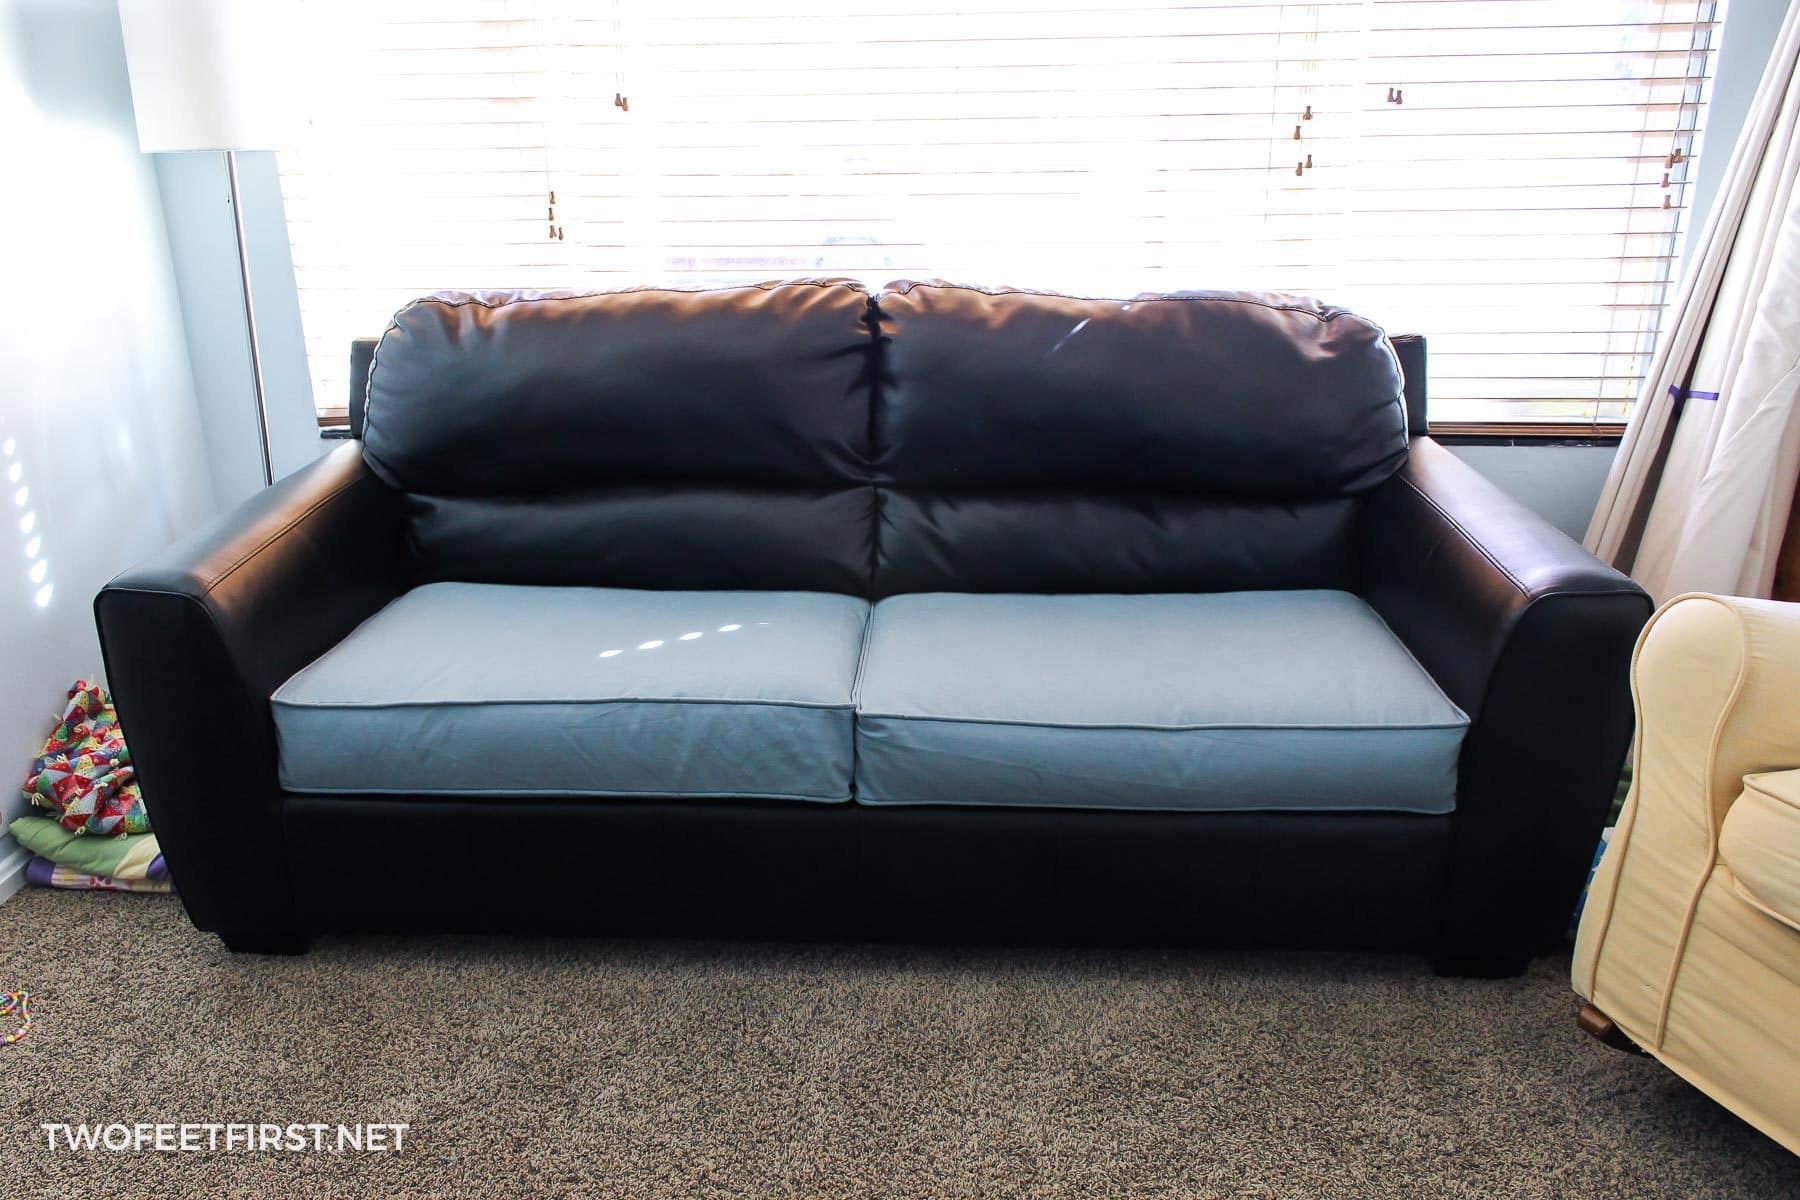 Sew A Cushion Cover With Zipper Enclosure, Replacement Zippered Leather Couch Cushion Covers